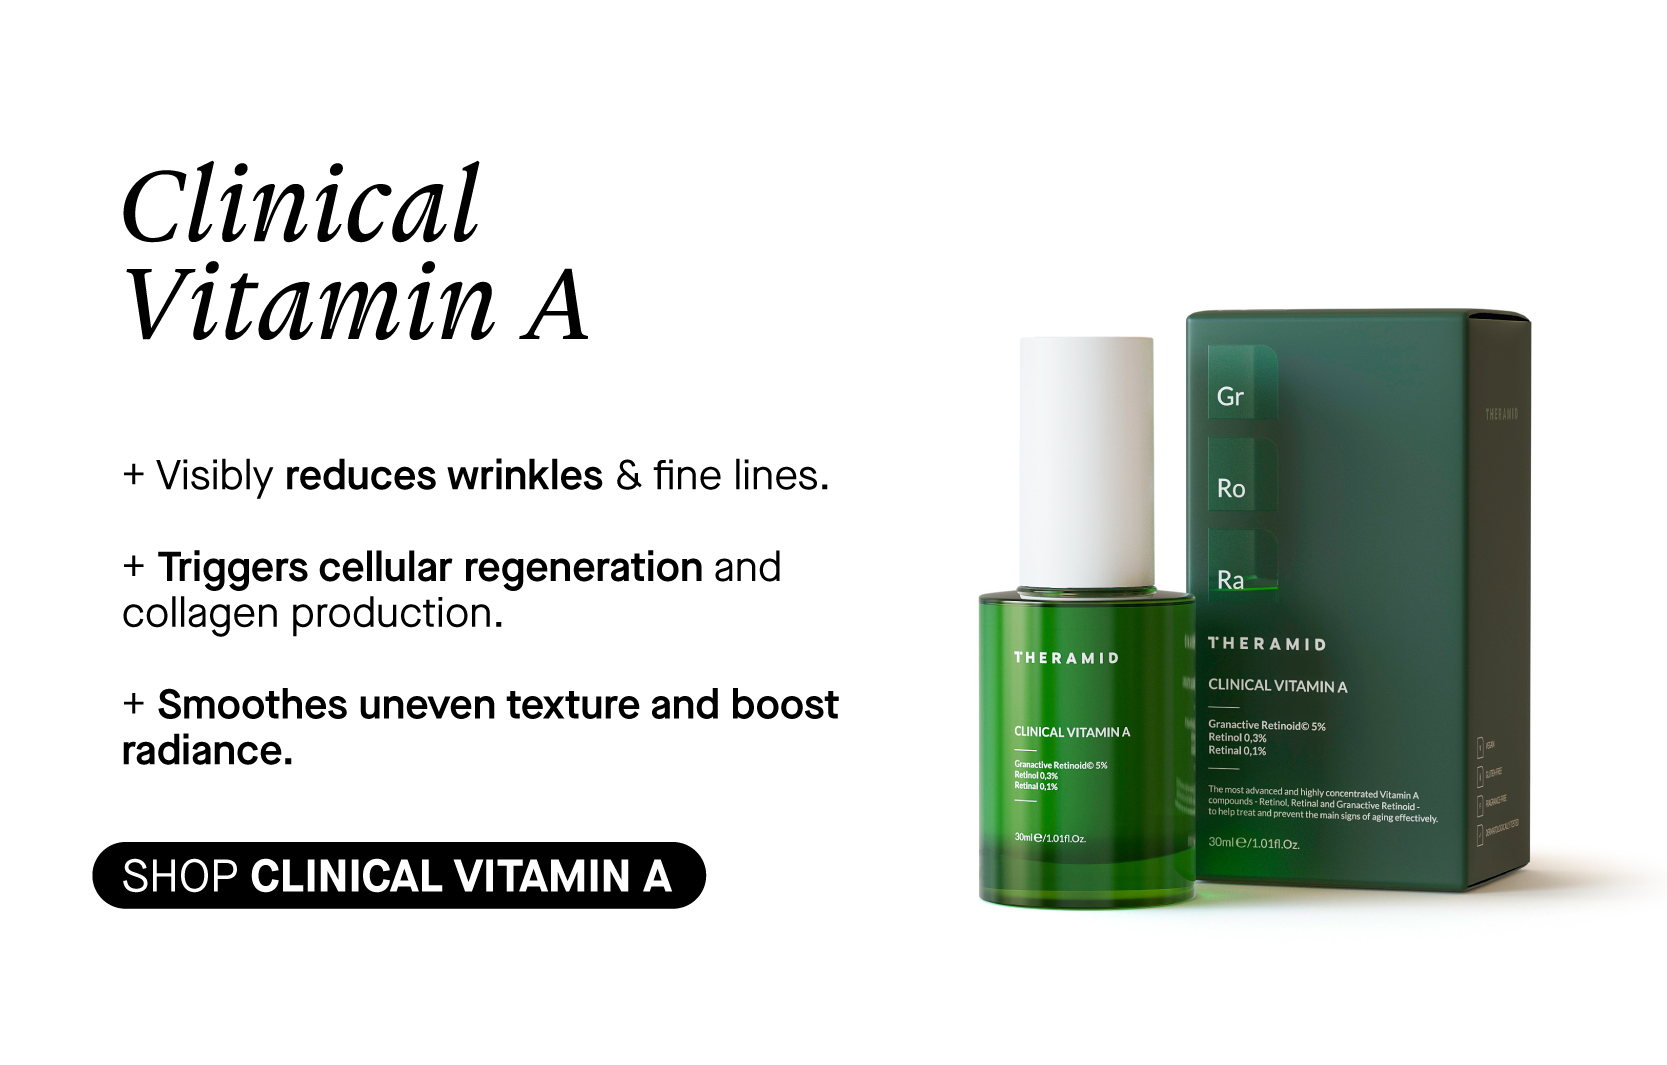 Clinical Vitamin A Visibly reduces wrinkles fine lines. Triggers cellular regeneration and collagen production. Smoothes uneven texture and boost radiance. SHOP CLINICAL VITAMIN A el Ro Ra THERAMID LN CLINICAL VITAMIN A 